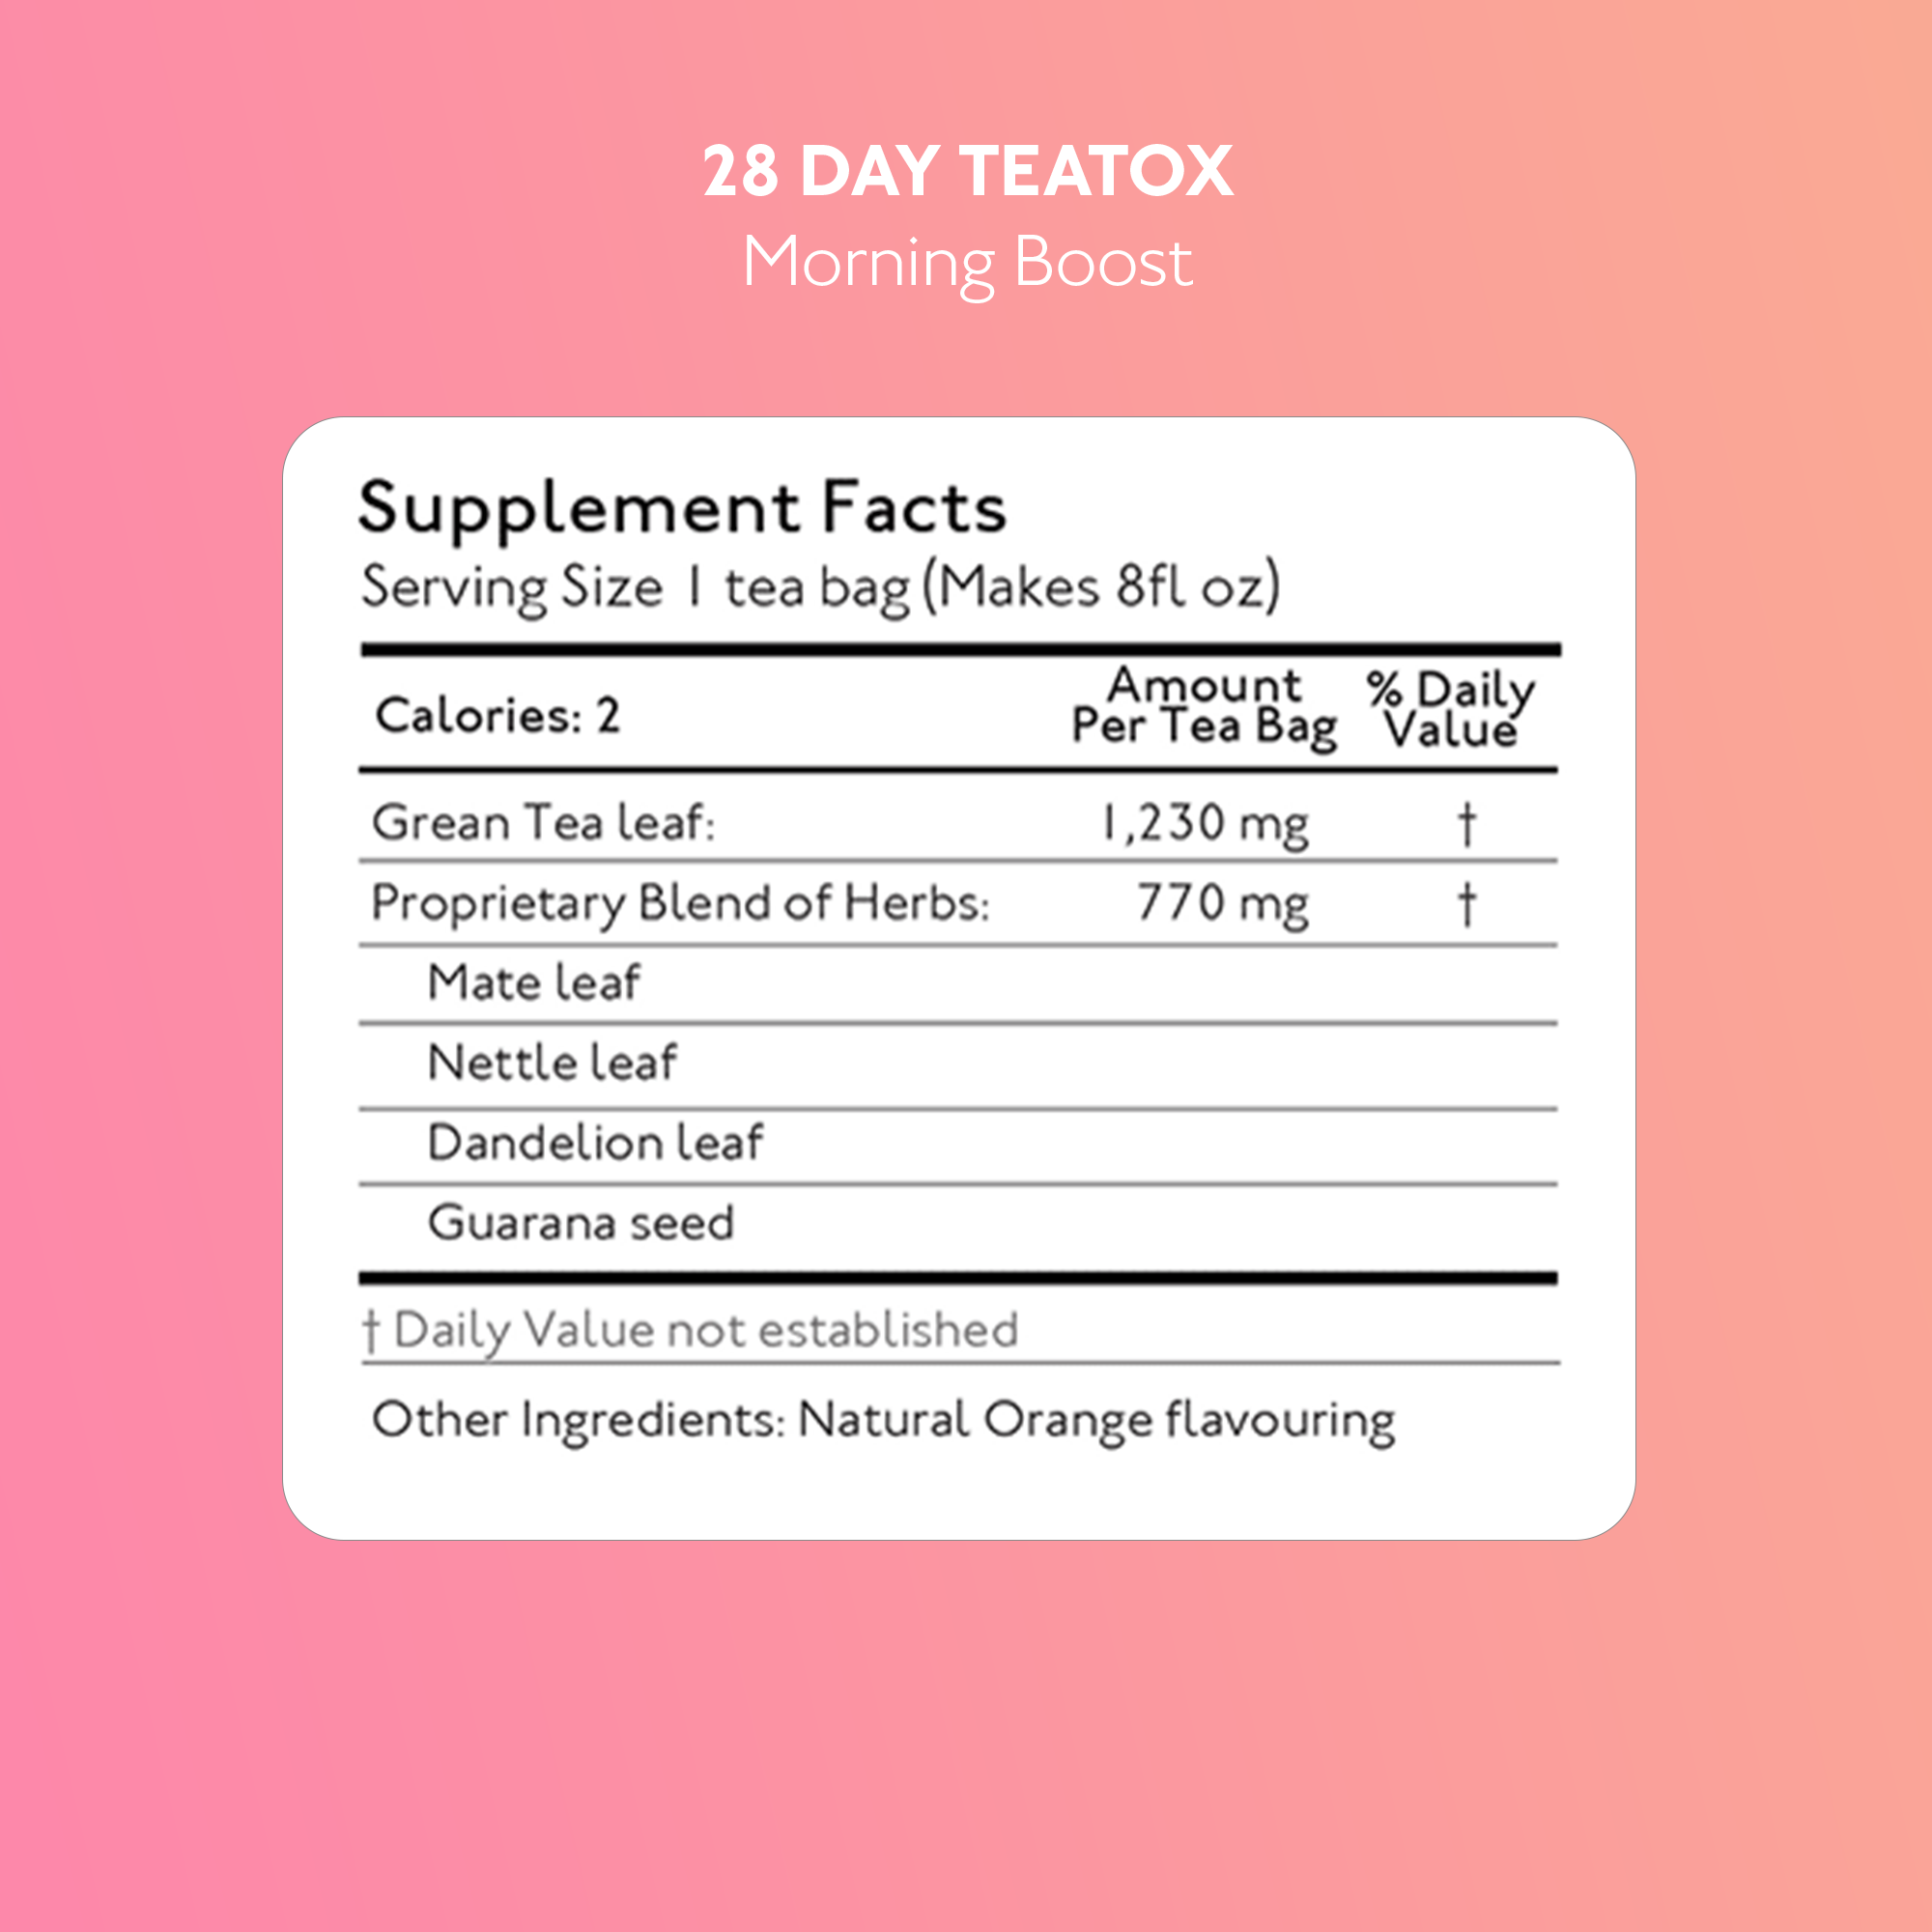 28 Day Teatox Morning Boost Supplement Facts